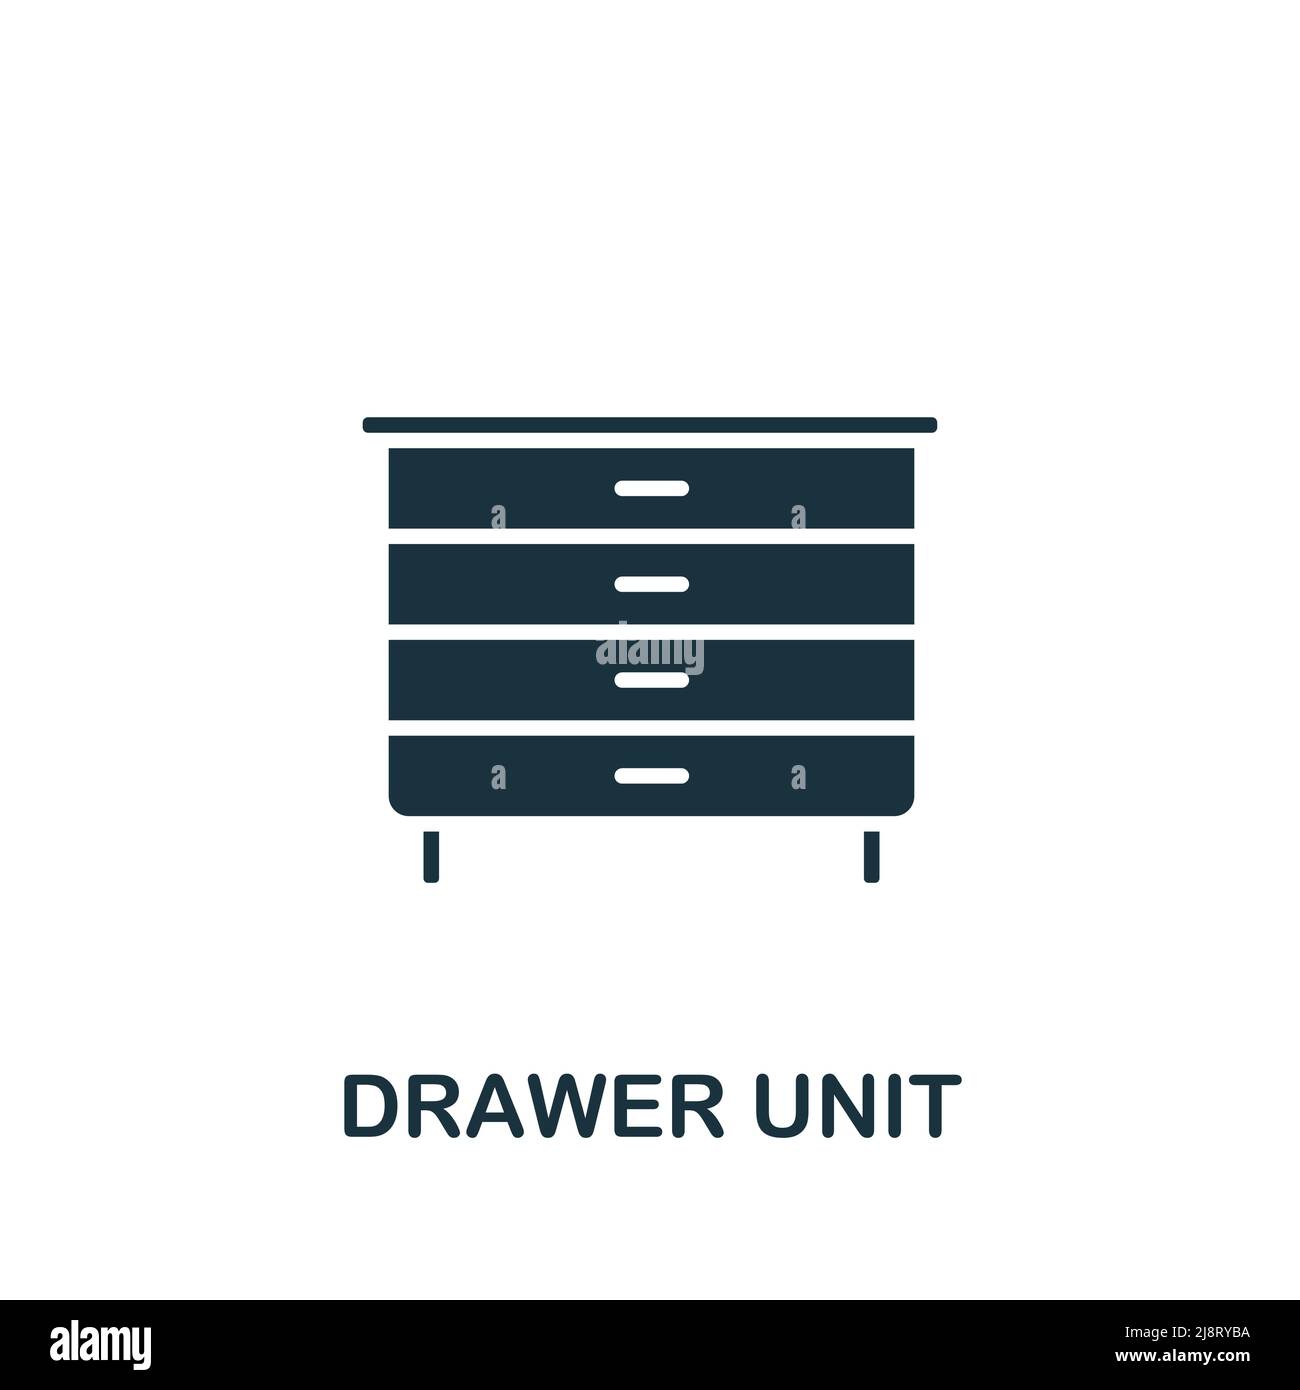 Drawer Unit icon. Monochrome simple Interior Furniture icon for templates, web design and infographics Stock Vector